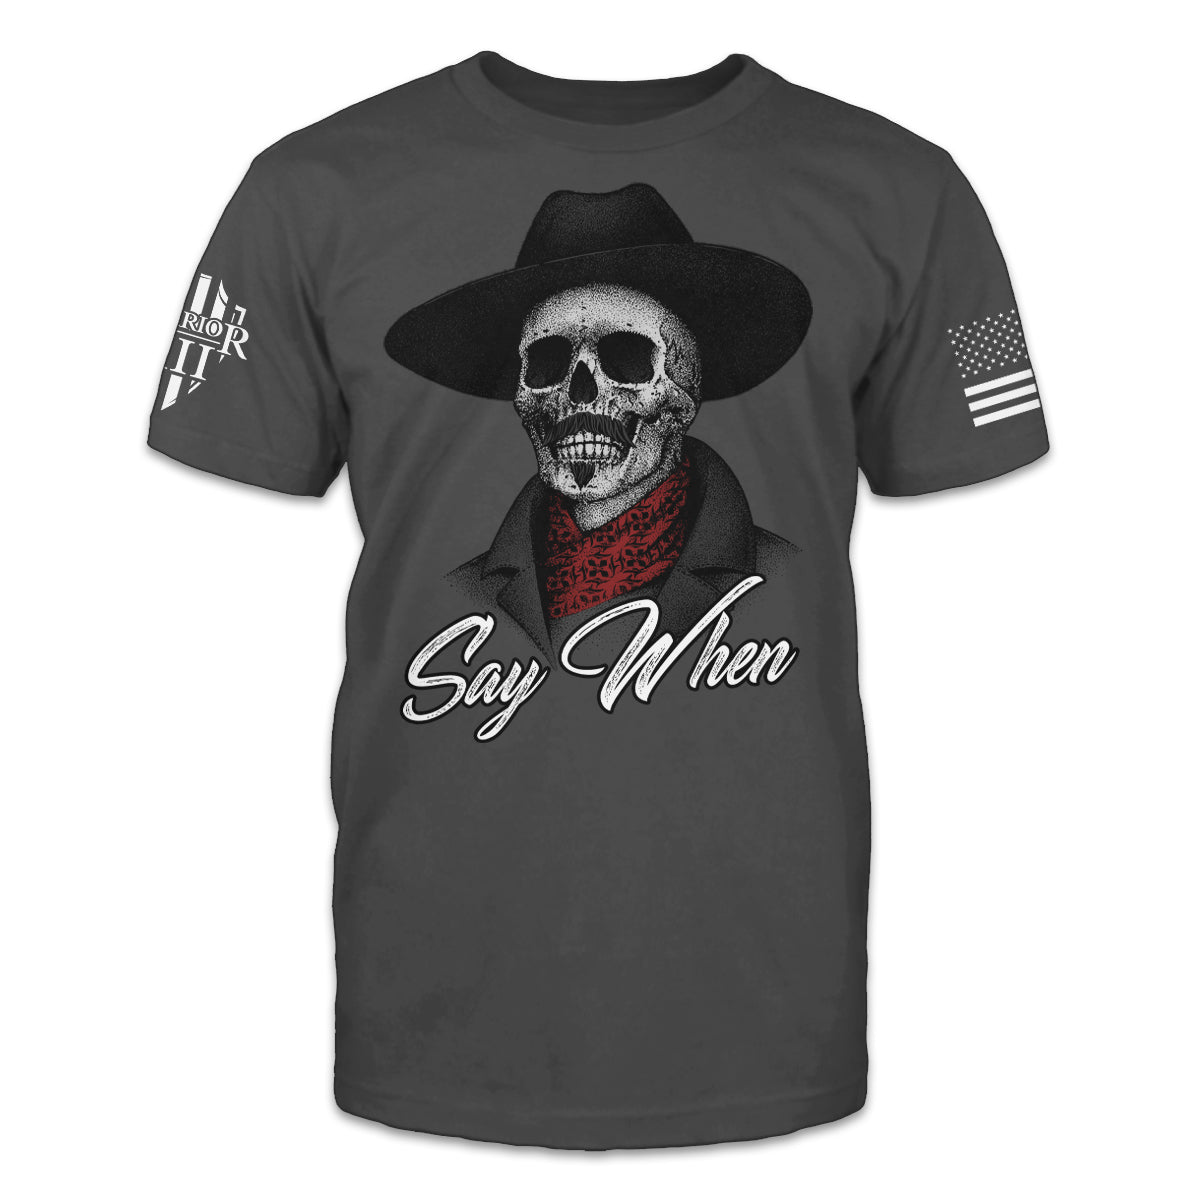 A dark grey t-shirt with the words "Say When" with a skeleton printed on the front of the shirt.